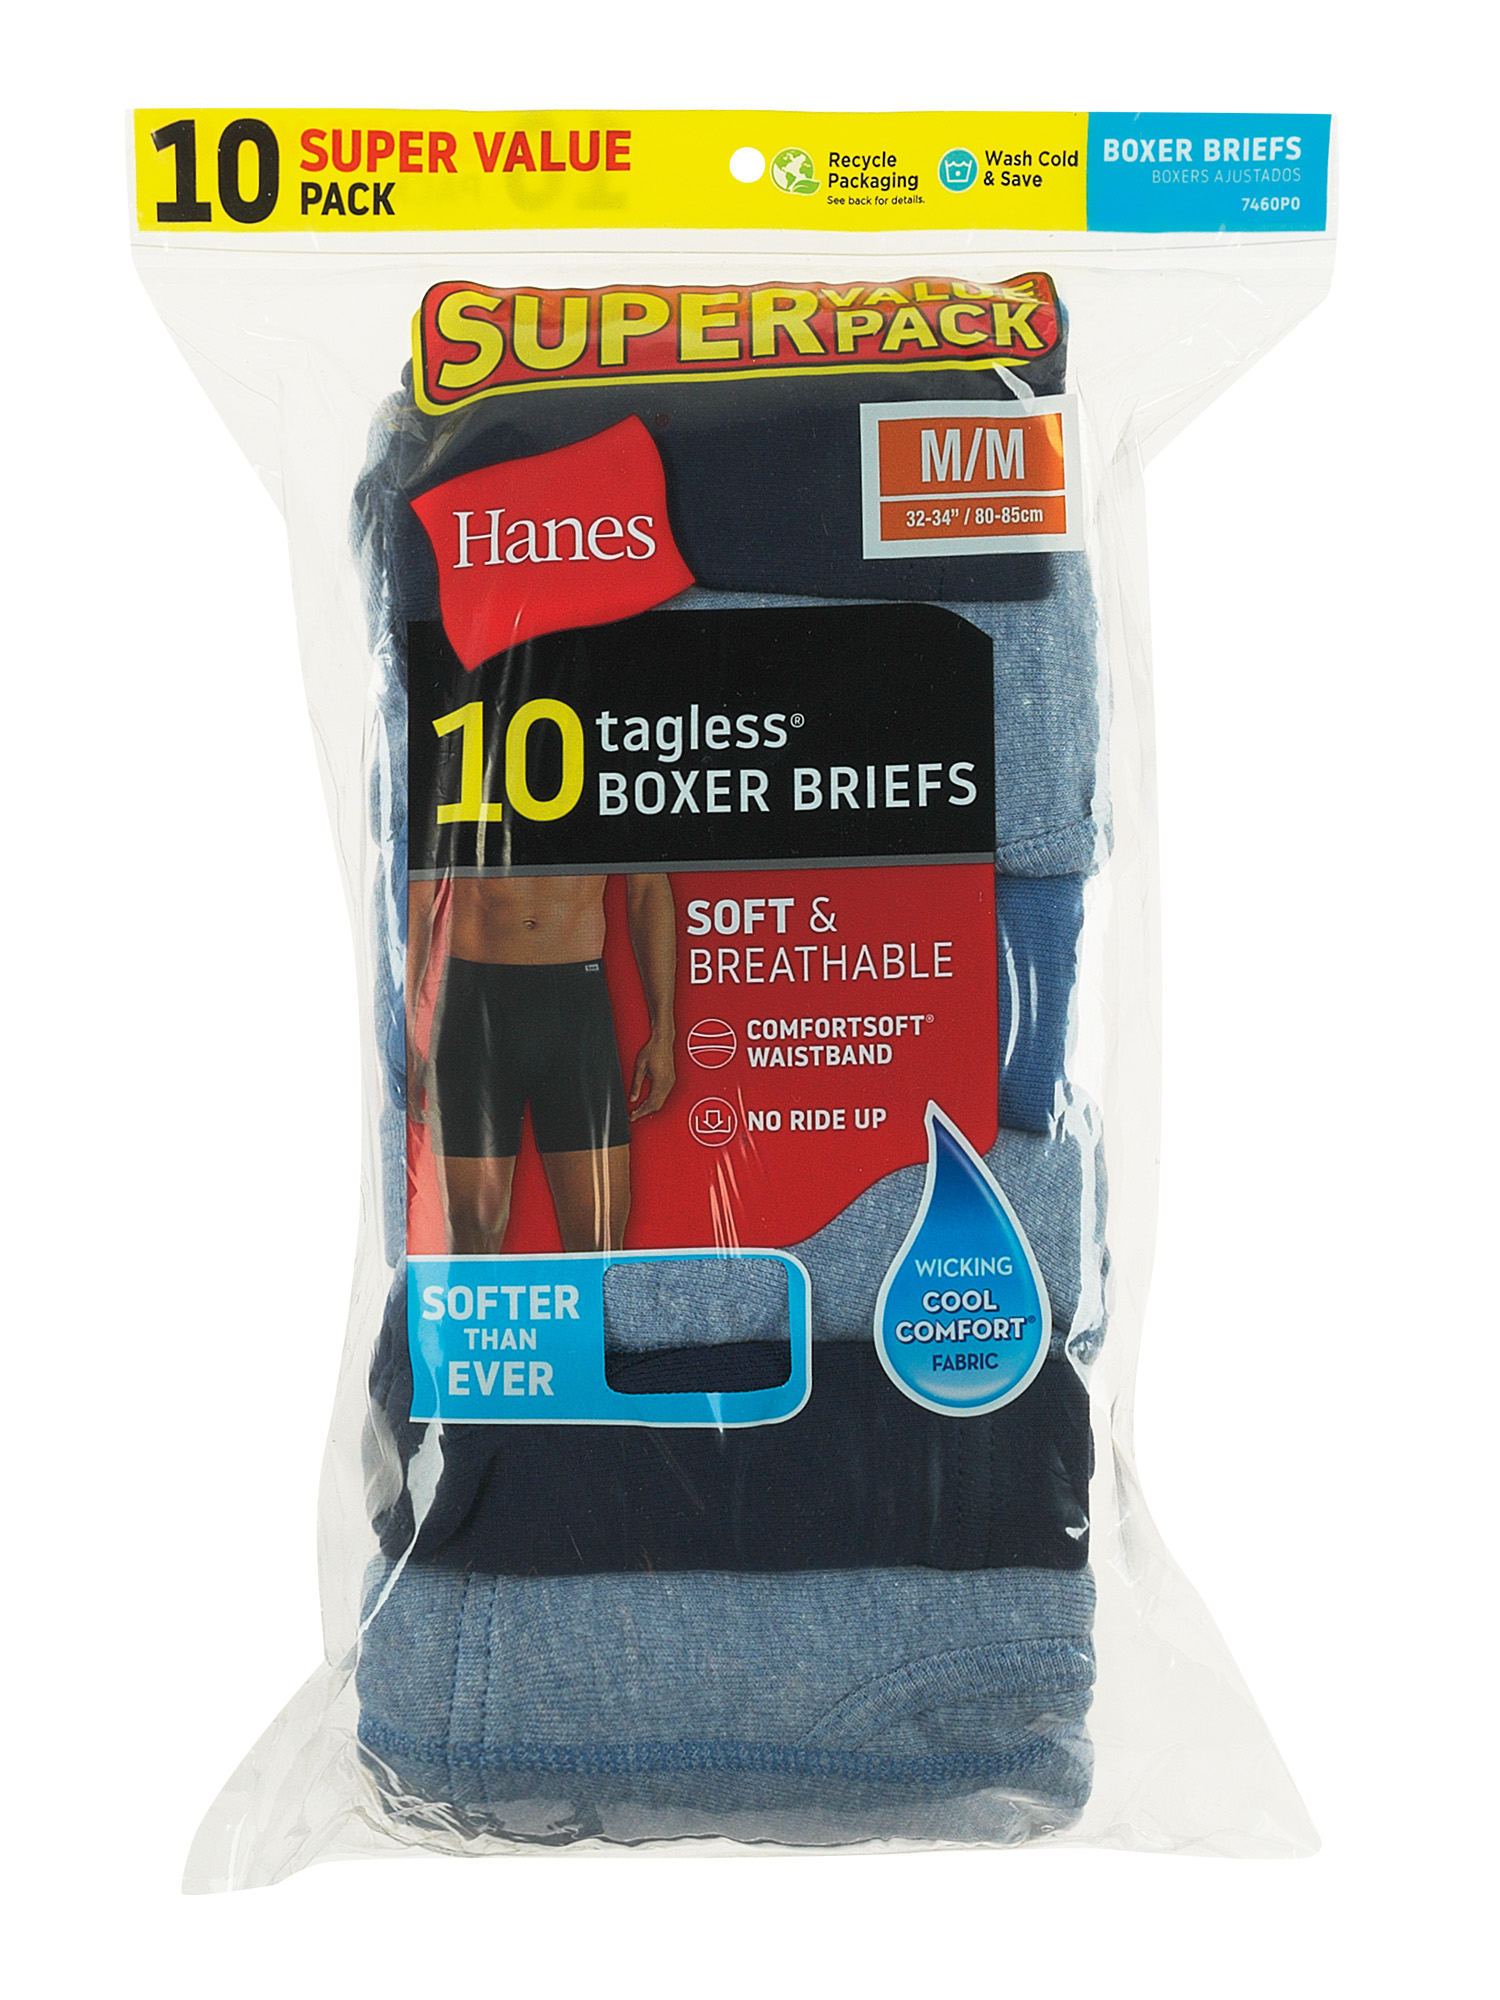 Hanes Men's Super Value Pack Covered Waistband Boxer Briefs 10 Pack - image 2 of 9